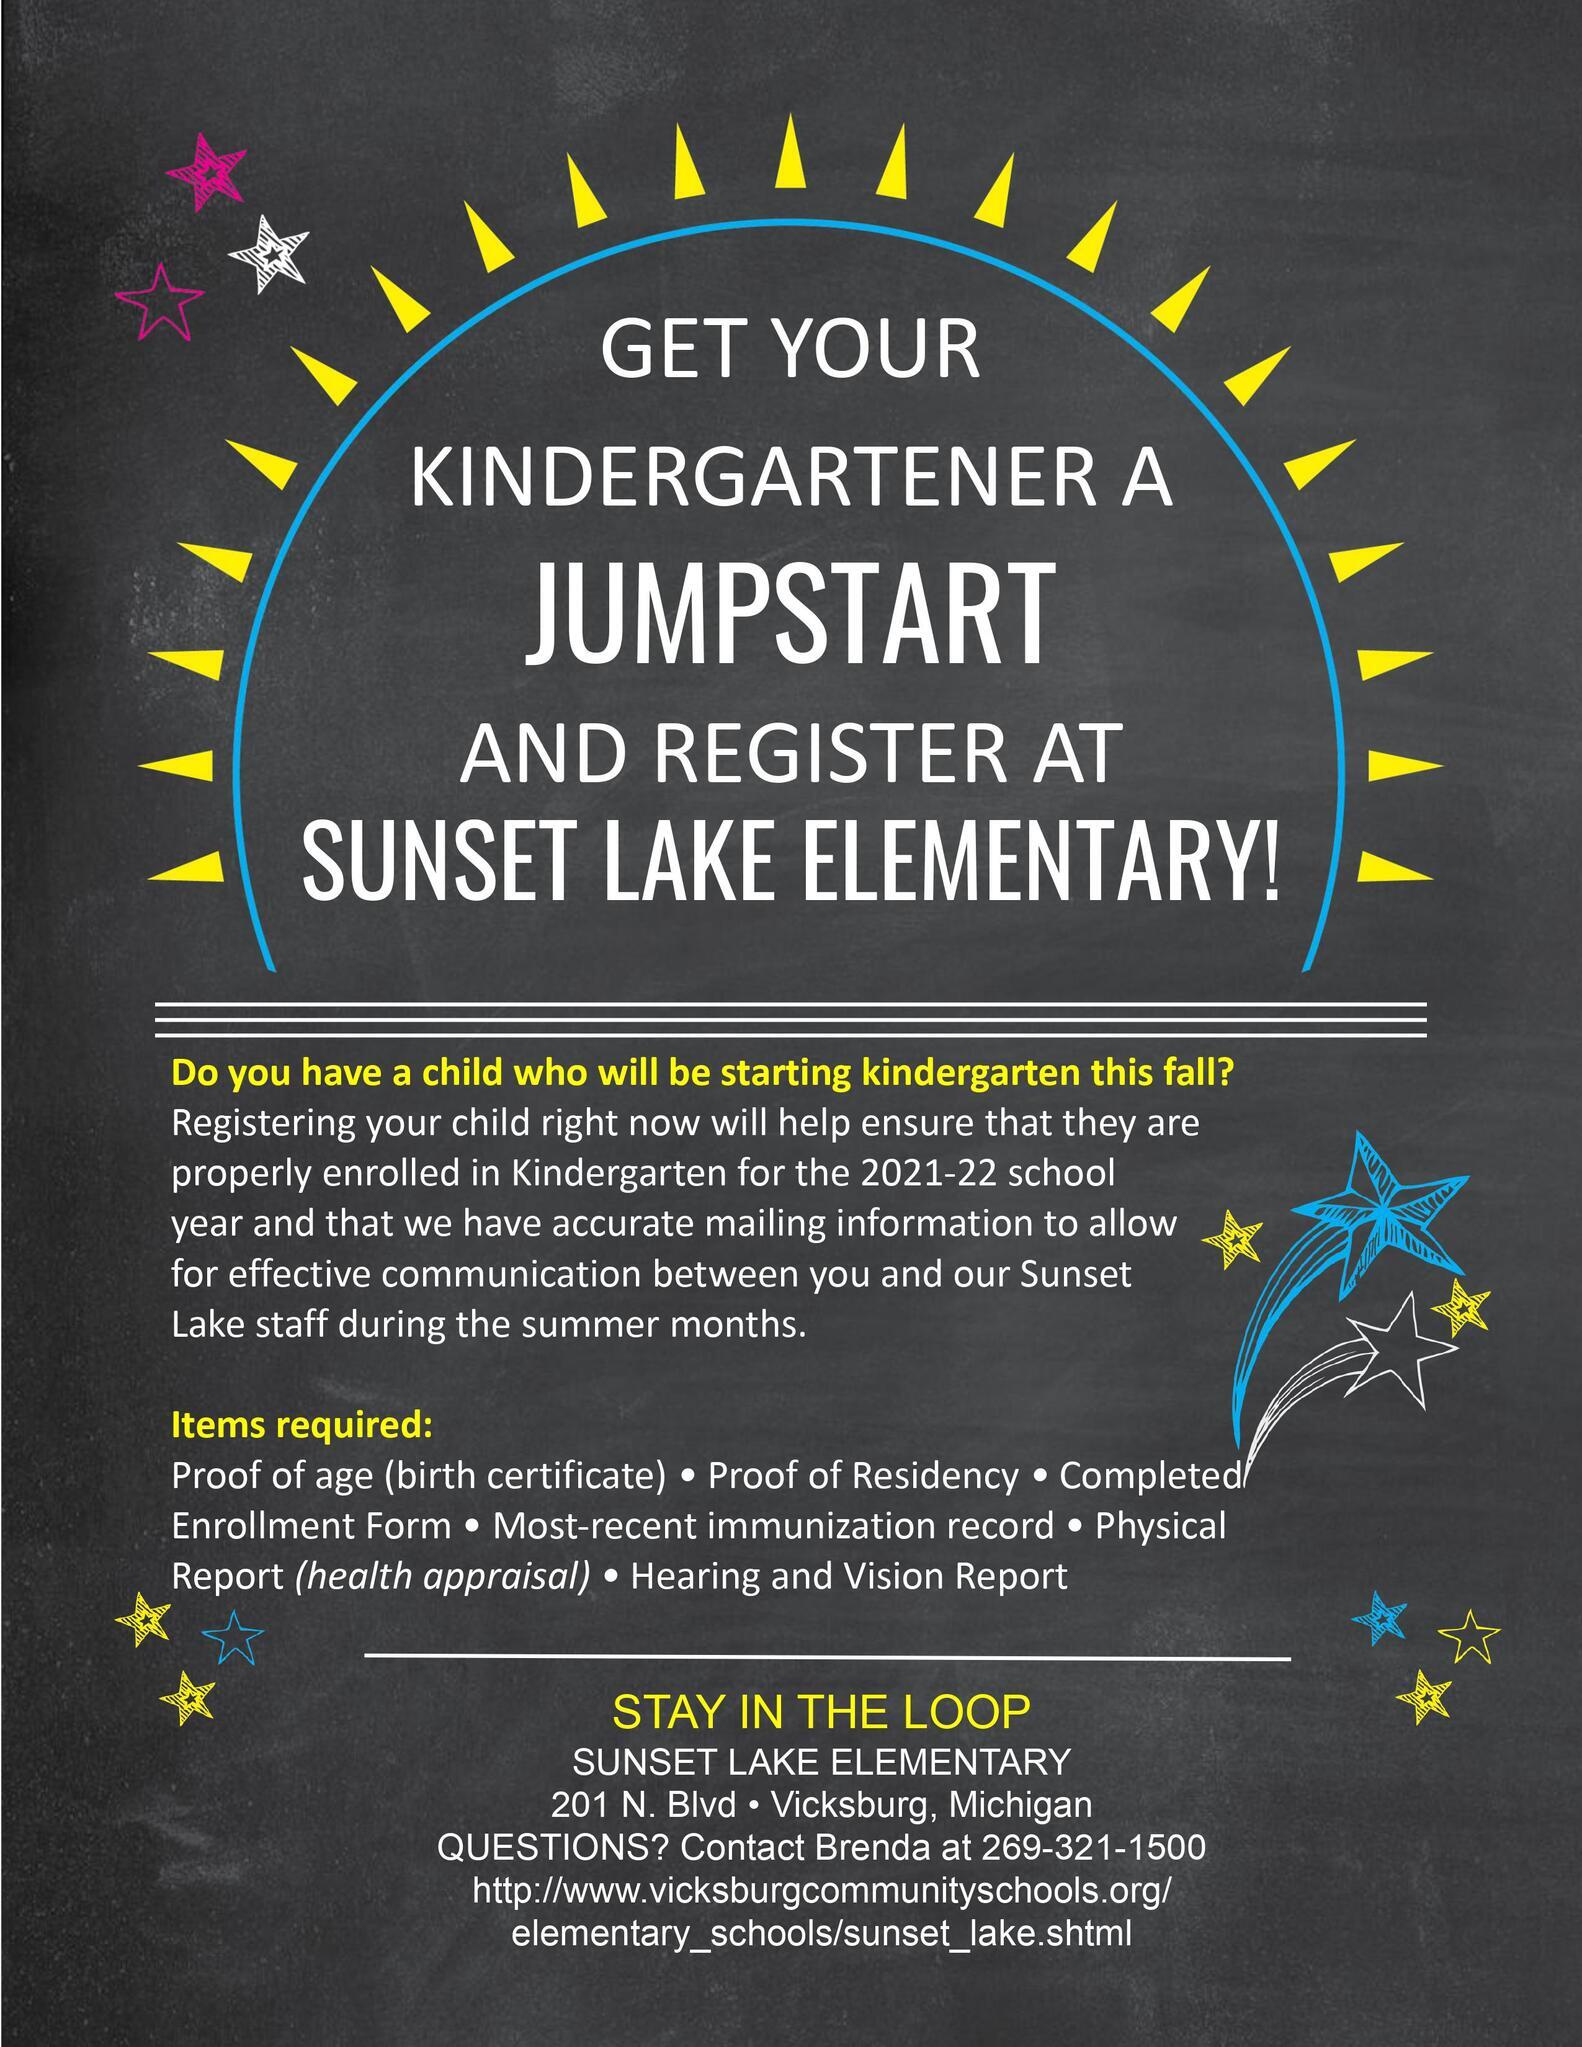 GET YOUR KINDERGARTENER A JUMPSTART AND REGISTER AT SUNSET LAKE ELEMENTARY! Do you have a child who will be starting kindergarten this fall? Registering your child right now will help ensure that they are properly enrolled in Kindergarten for the 2021-22 school year and that we have accurate mailing information to allow for effective communication between you and our Sunset Lake staff during the summer months. Items required: Proof of age (birth certificate) • Proof of Residency • Completed Enrollment Form • Most-recent immunization record • Physical Report (health appraisal) • Hearing and Vision Report STAY IN THE LOOP SUNSET LAKE ELEMENTARY 201 N. Blvd • Vicksburg, Michigan QUESTIONS? Contact Brenda at 269-321-1500